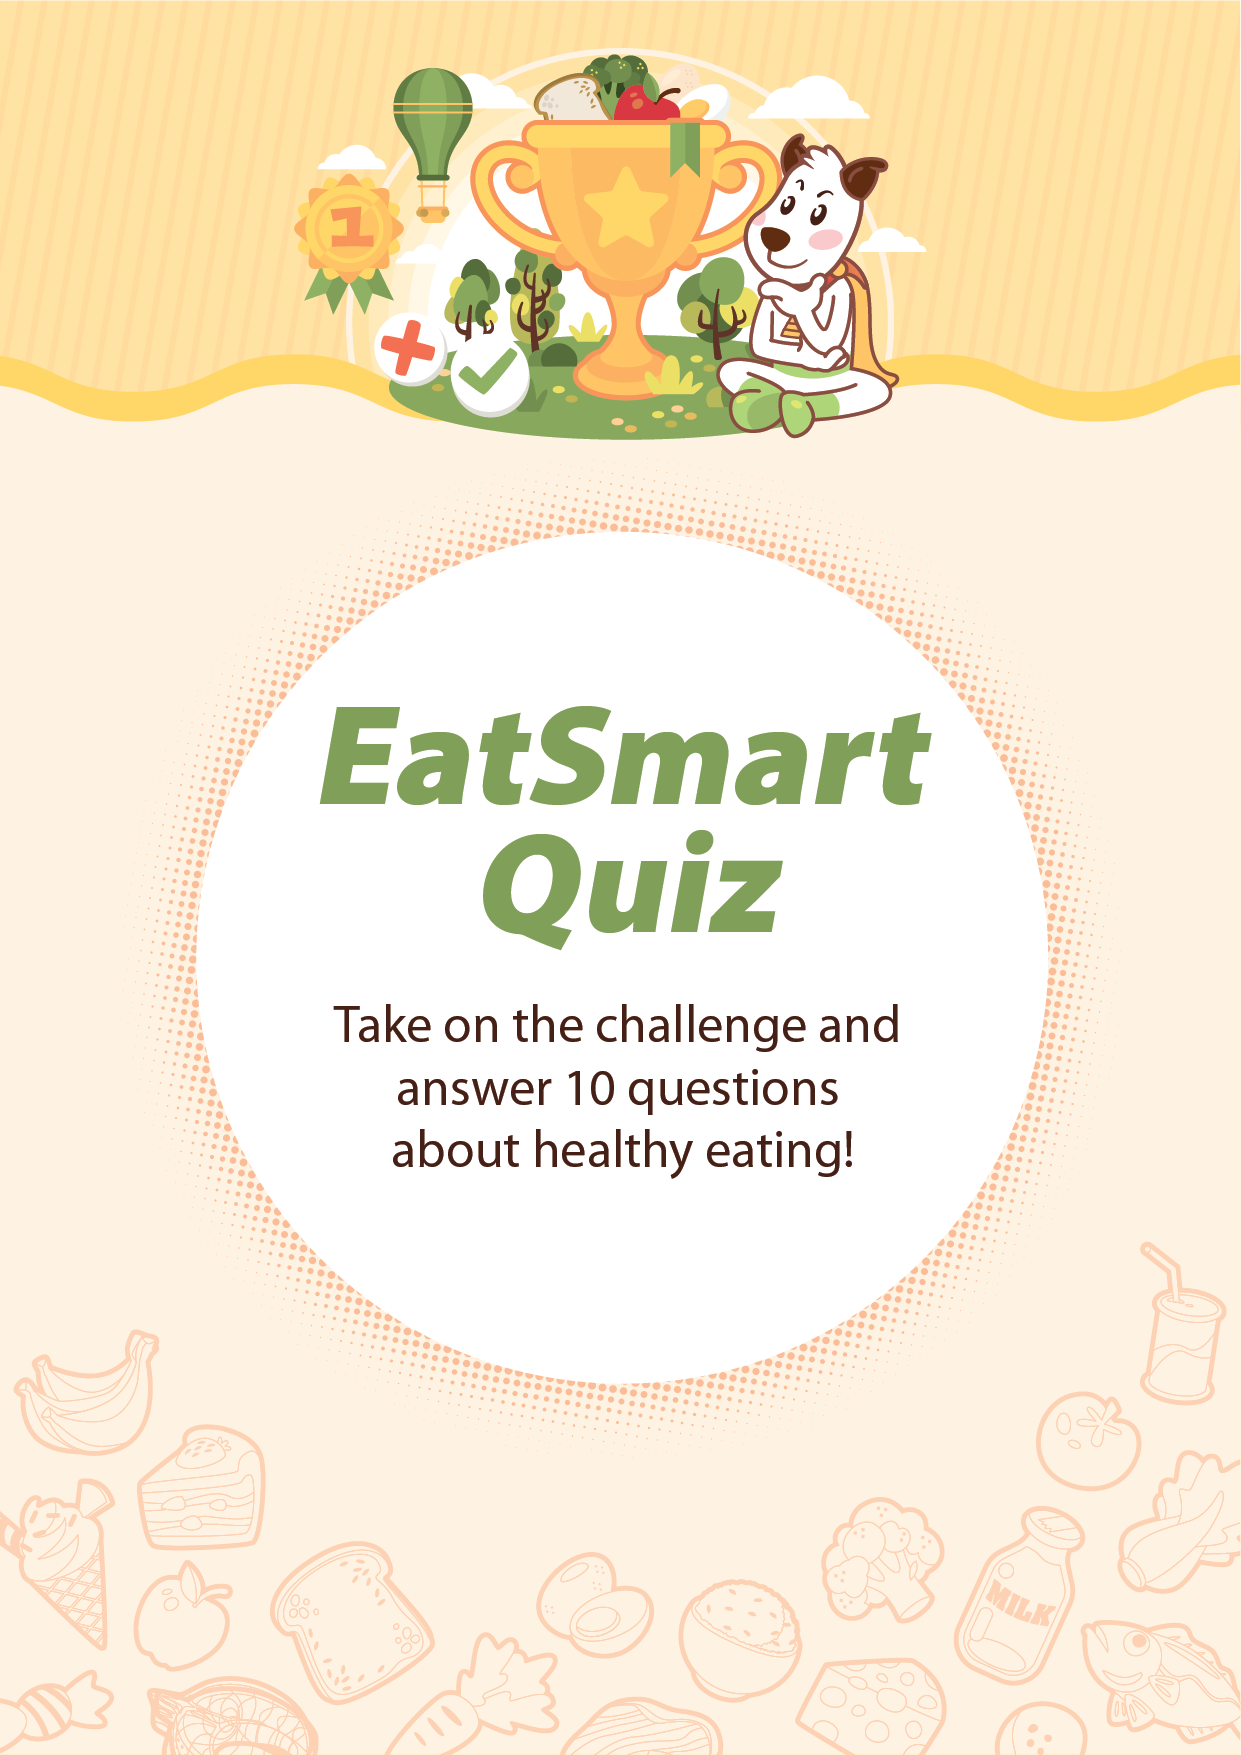 EatSmart Under the New Normal – Eat Smart Quiz Take on the challenge and answer 10 questions about healthy eating!